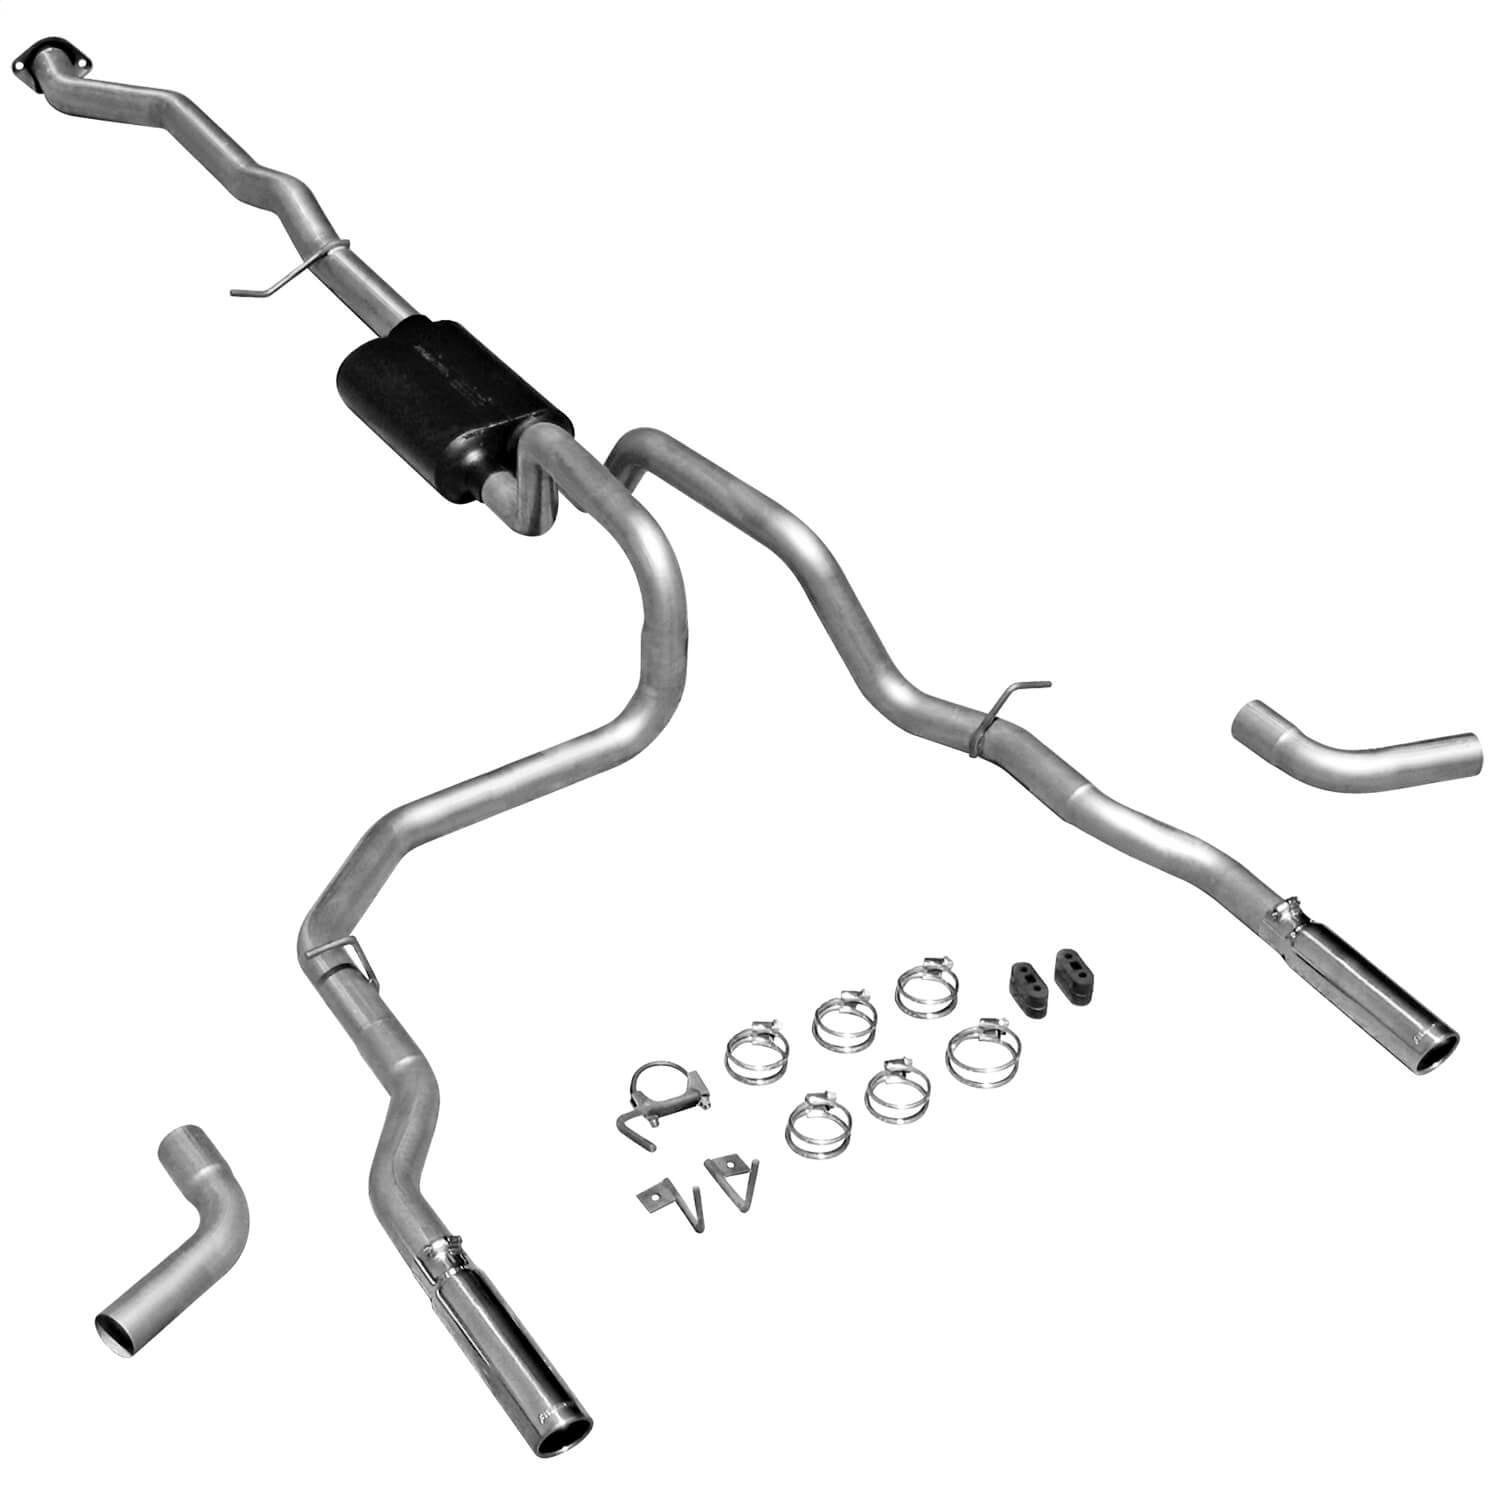 Flowmaster 17428 American Thunder Cat Back Exhaust System